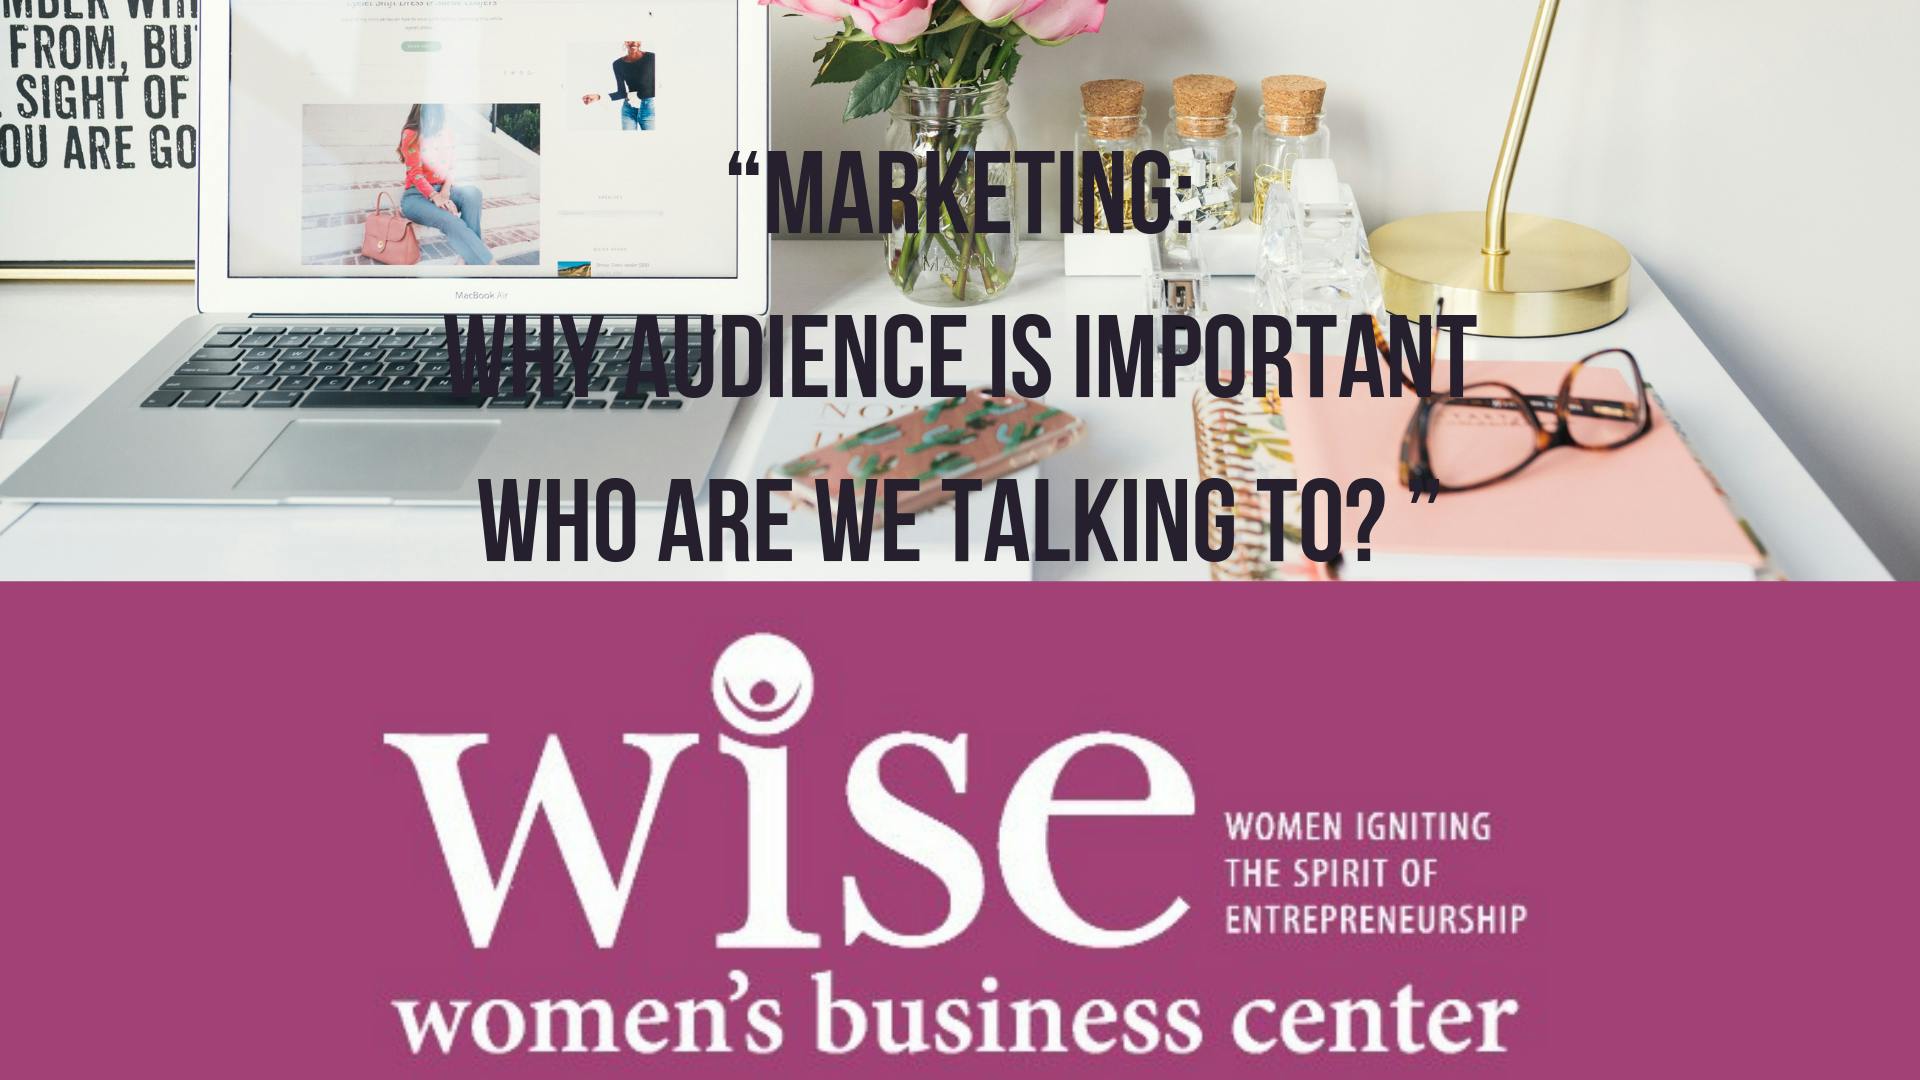 “Marketing:Why Audience is Important-WHO ARE WE TALKING TO? ” 